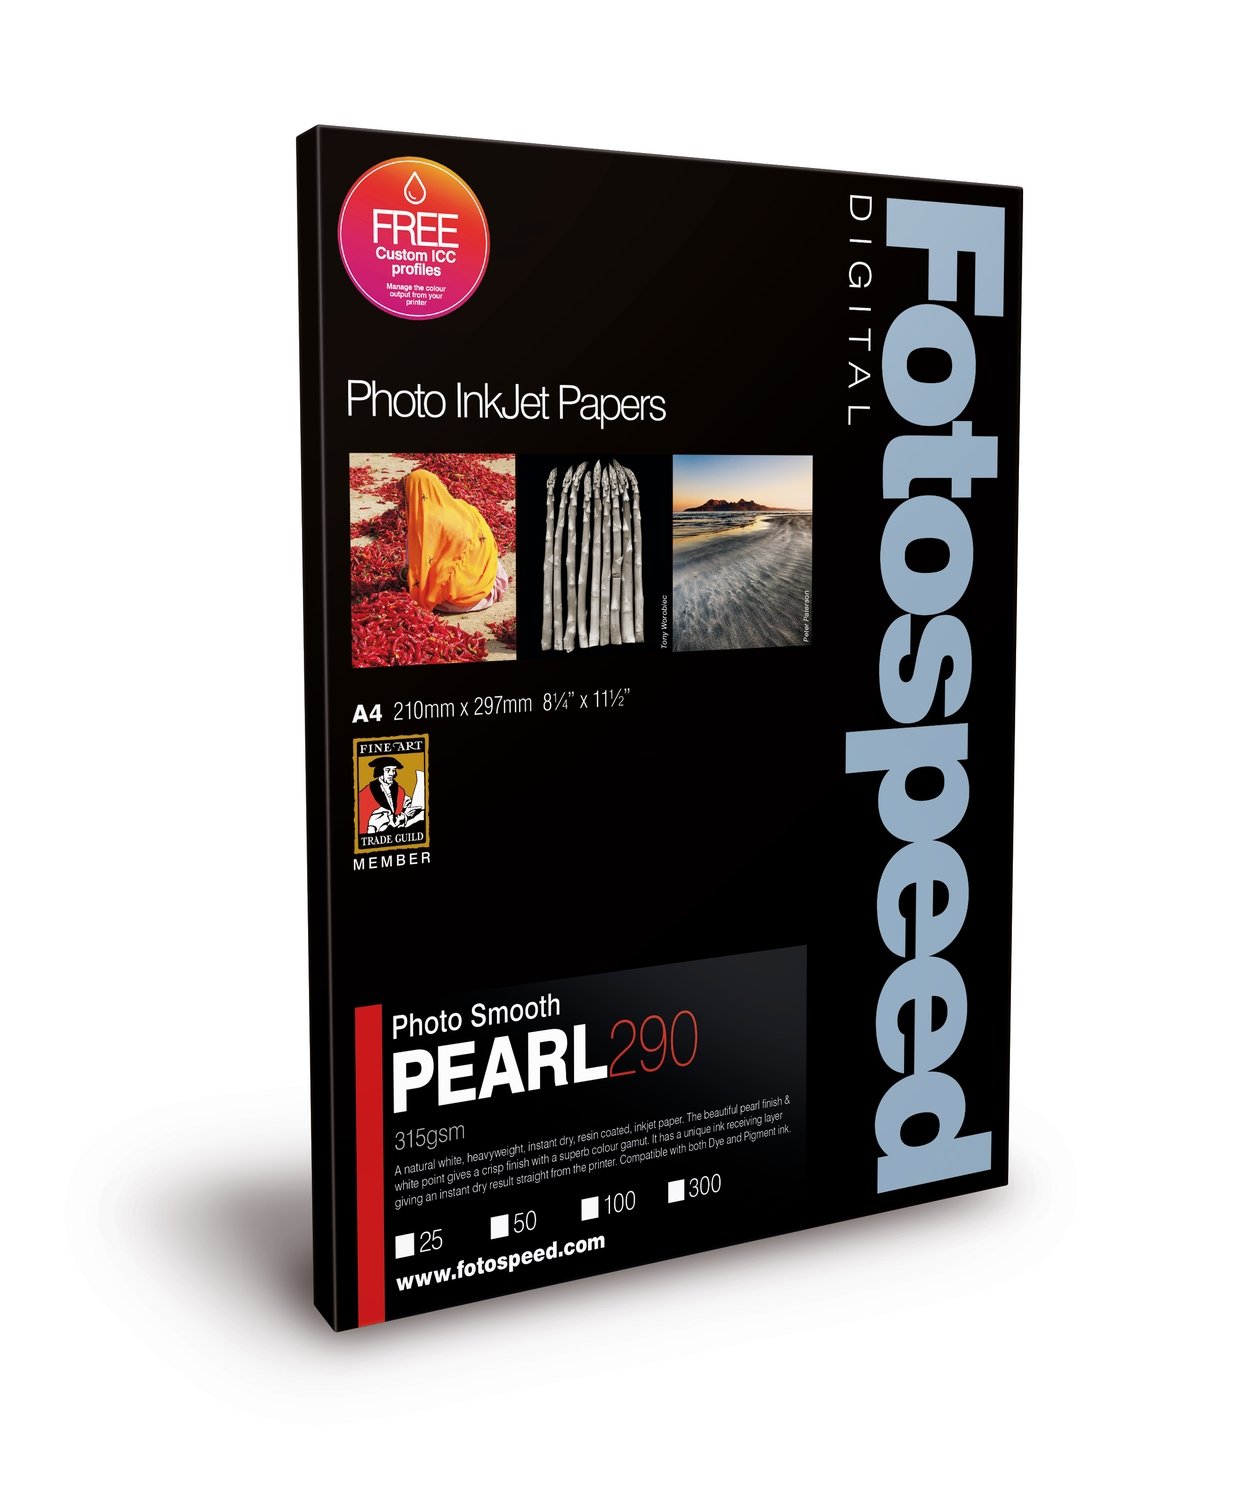 Fotospeed Photo Smooth Pearl 290 (A4, 500 sheets) - 7D591